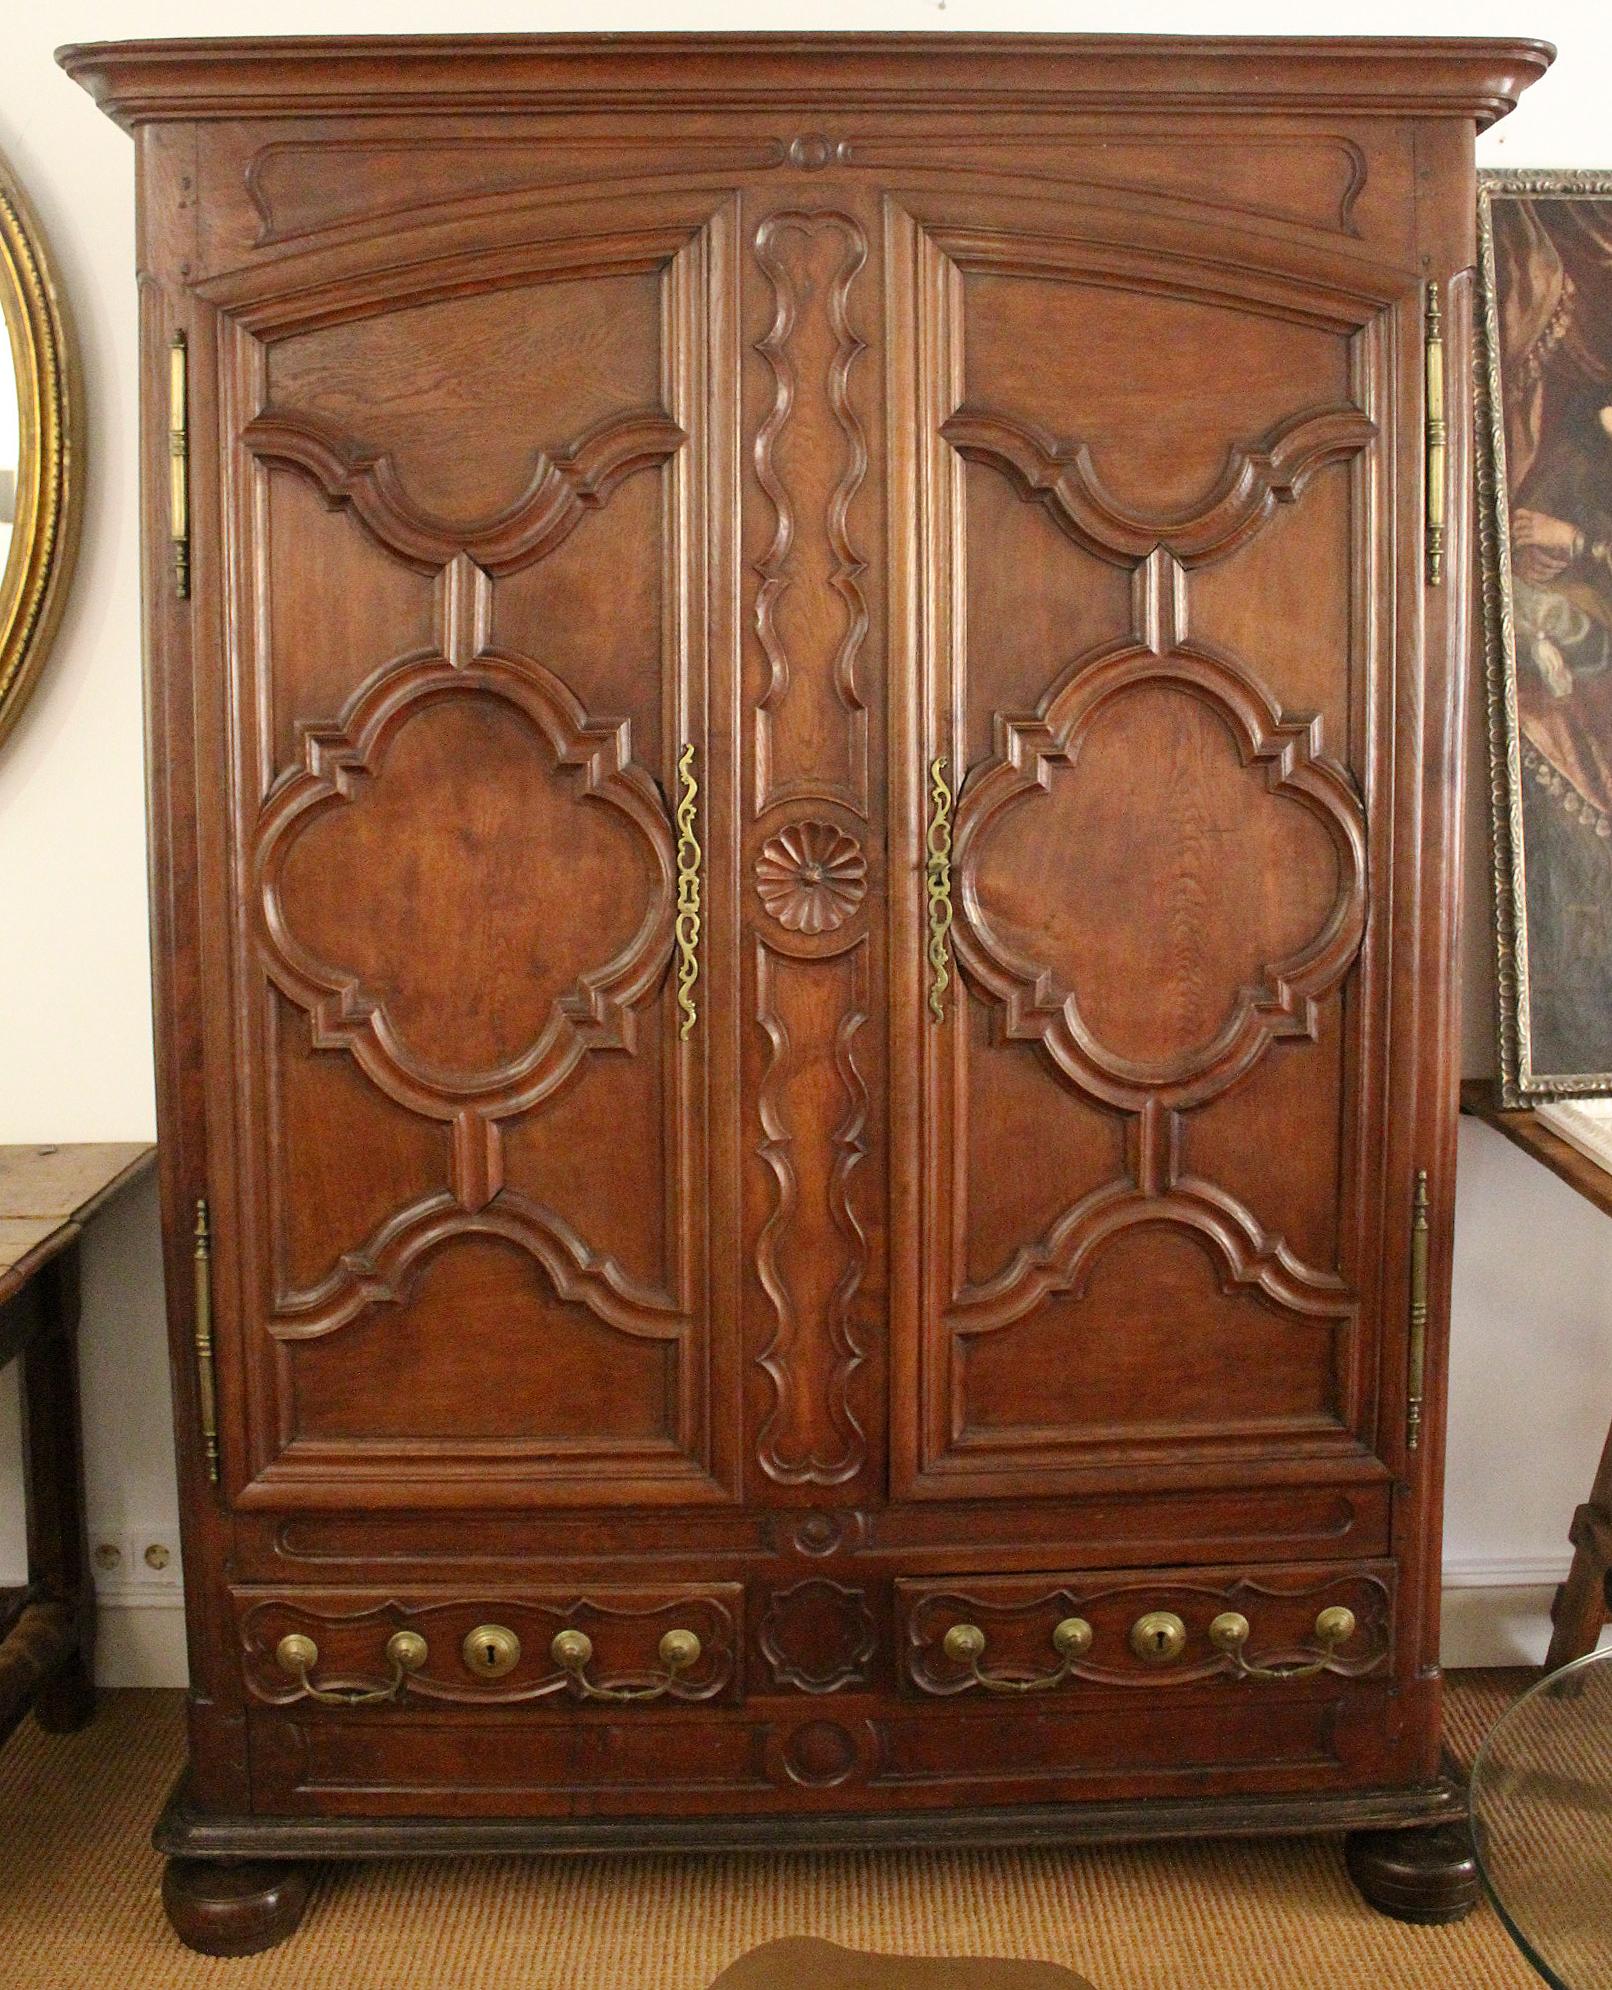 18t century northern France oak wardrobe with two doors and two drawers. Front and sides are decorated in neoclassical style hand carved reliefs with elegant fluted motifs and geometric shapes. High quality bronze fittings, all original, including